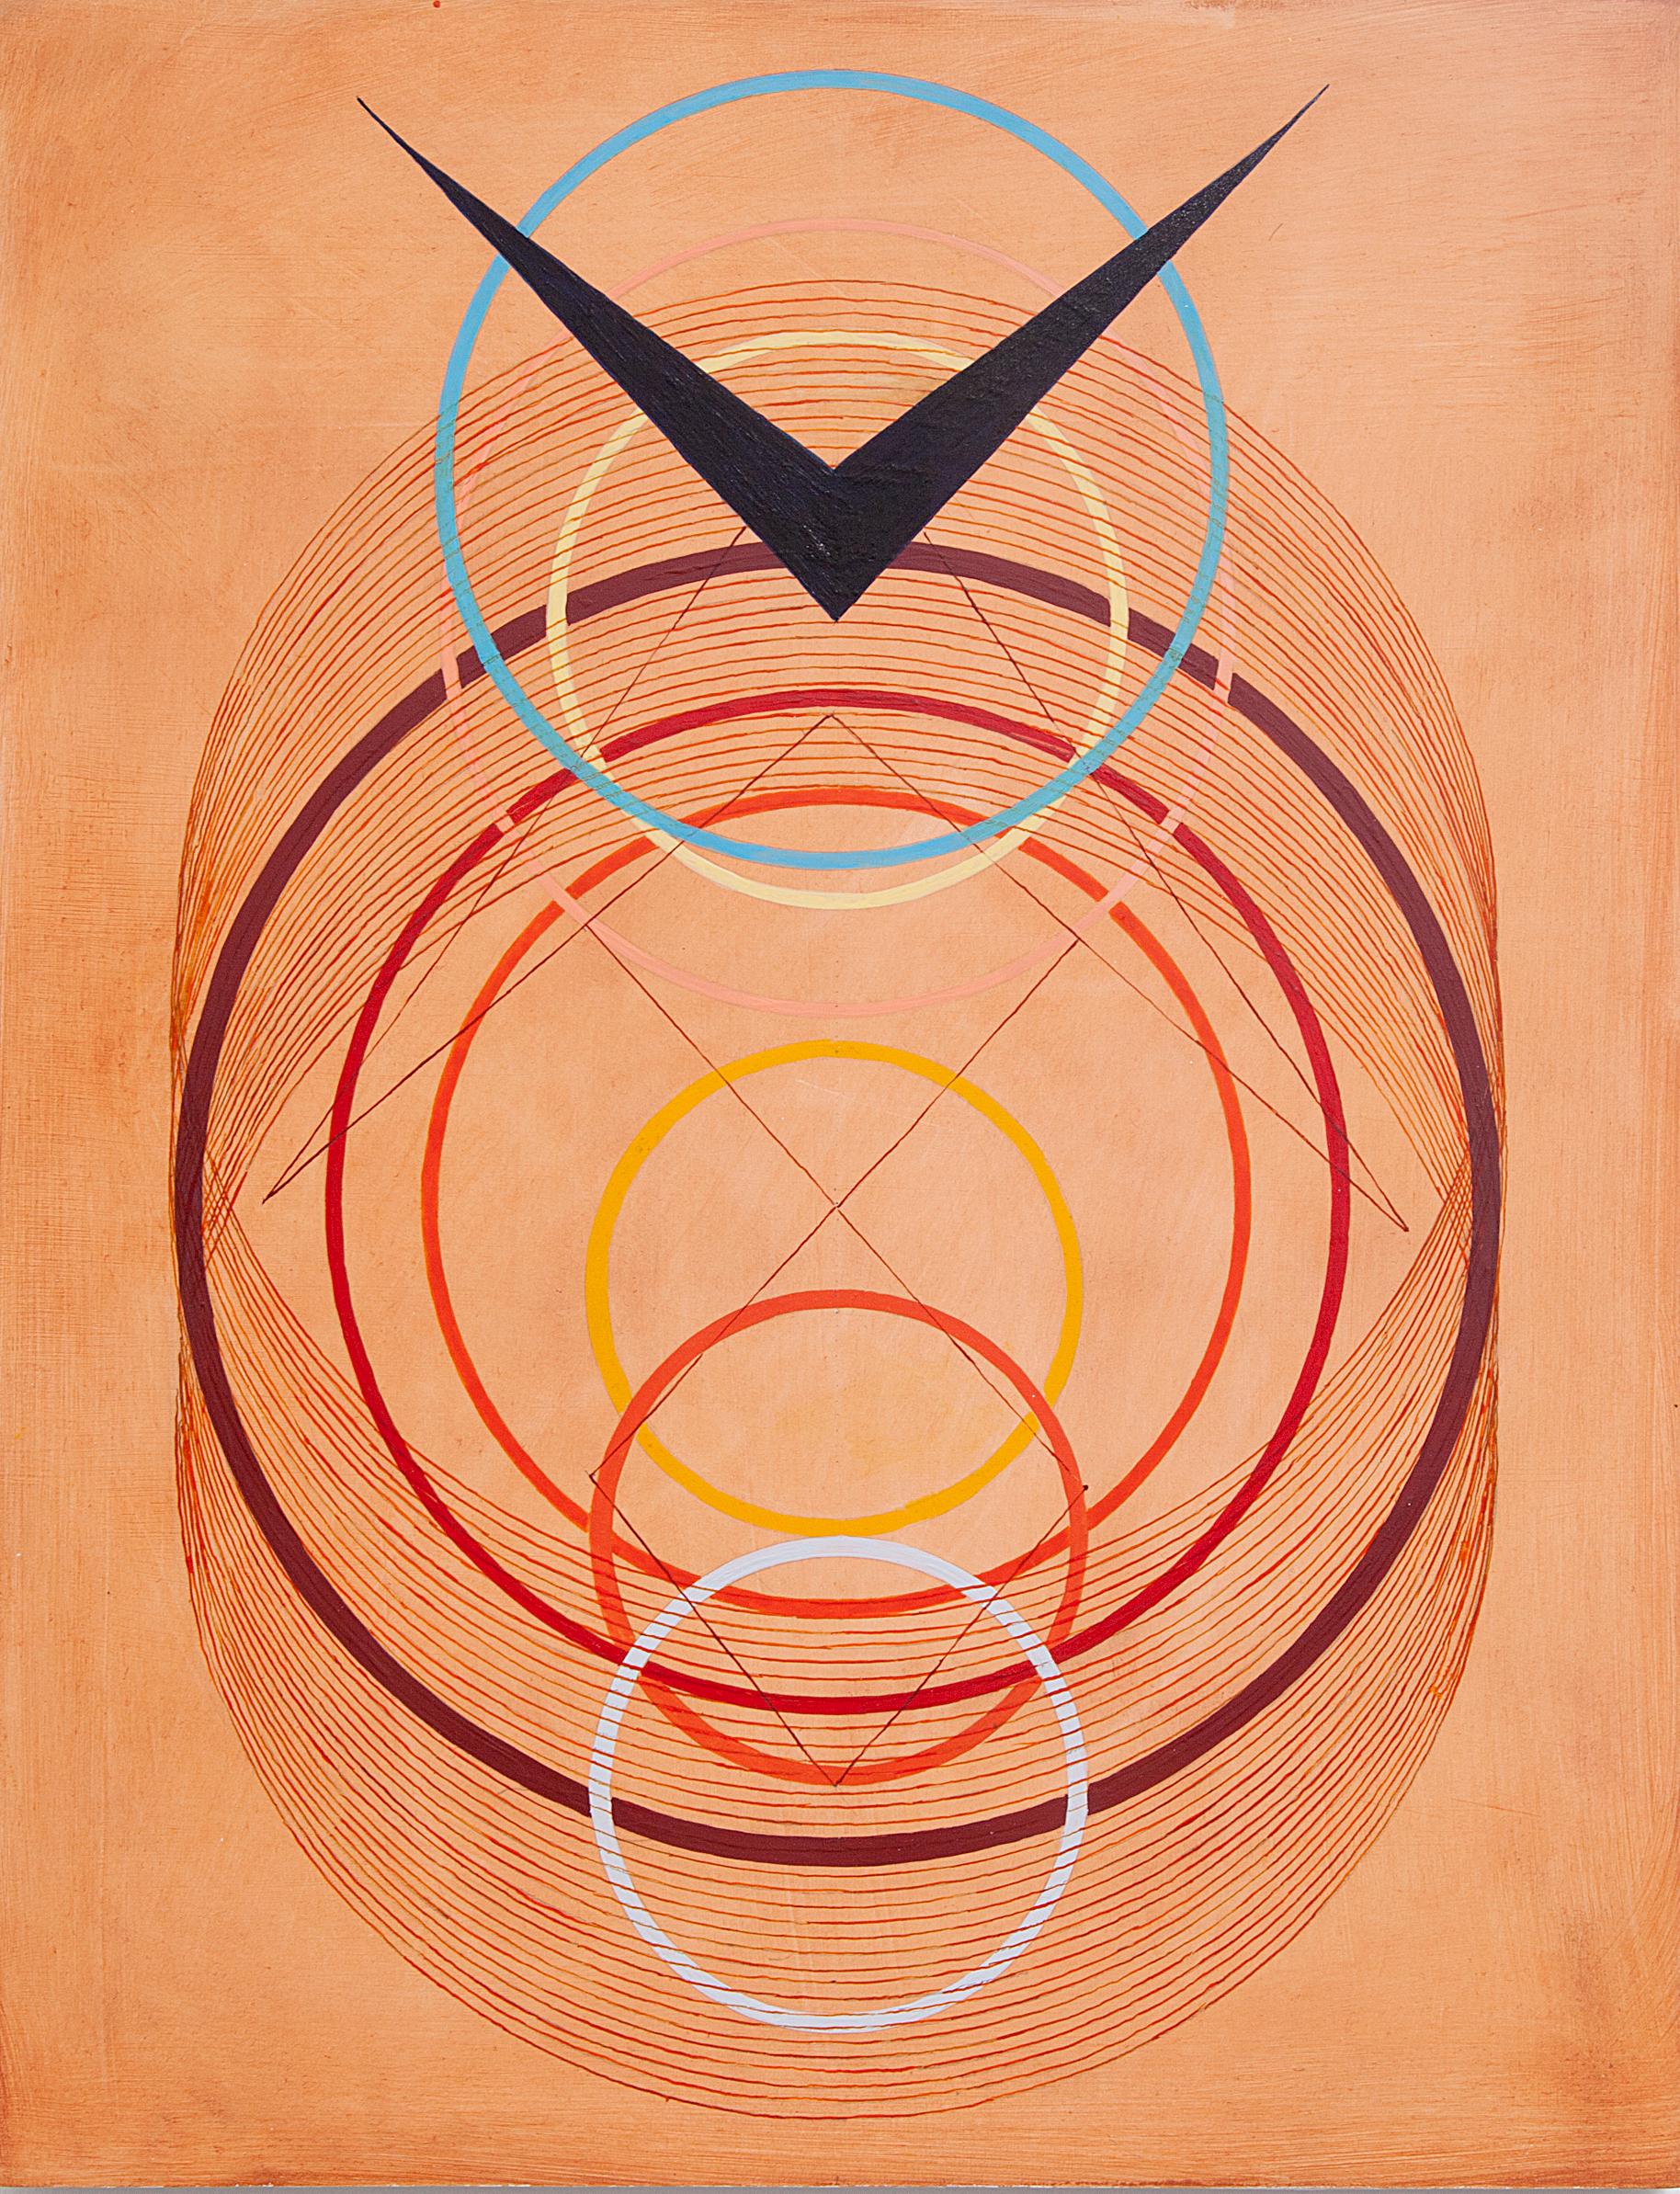 Tayo Heuser, Accretion Disk, 2016, ink on wood panel, 18